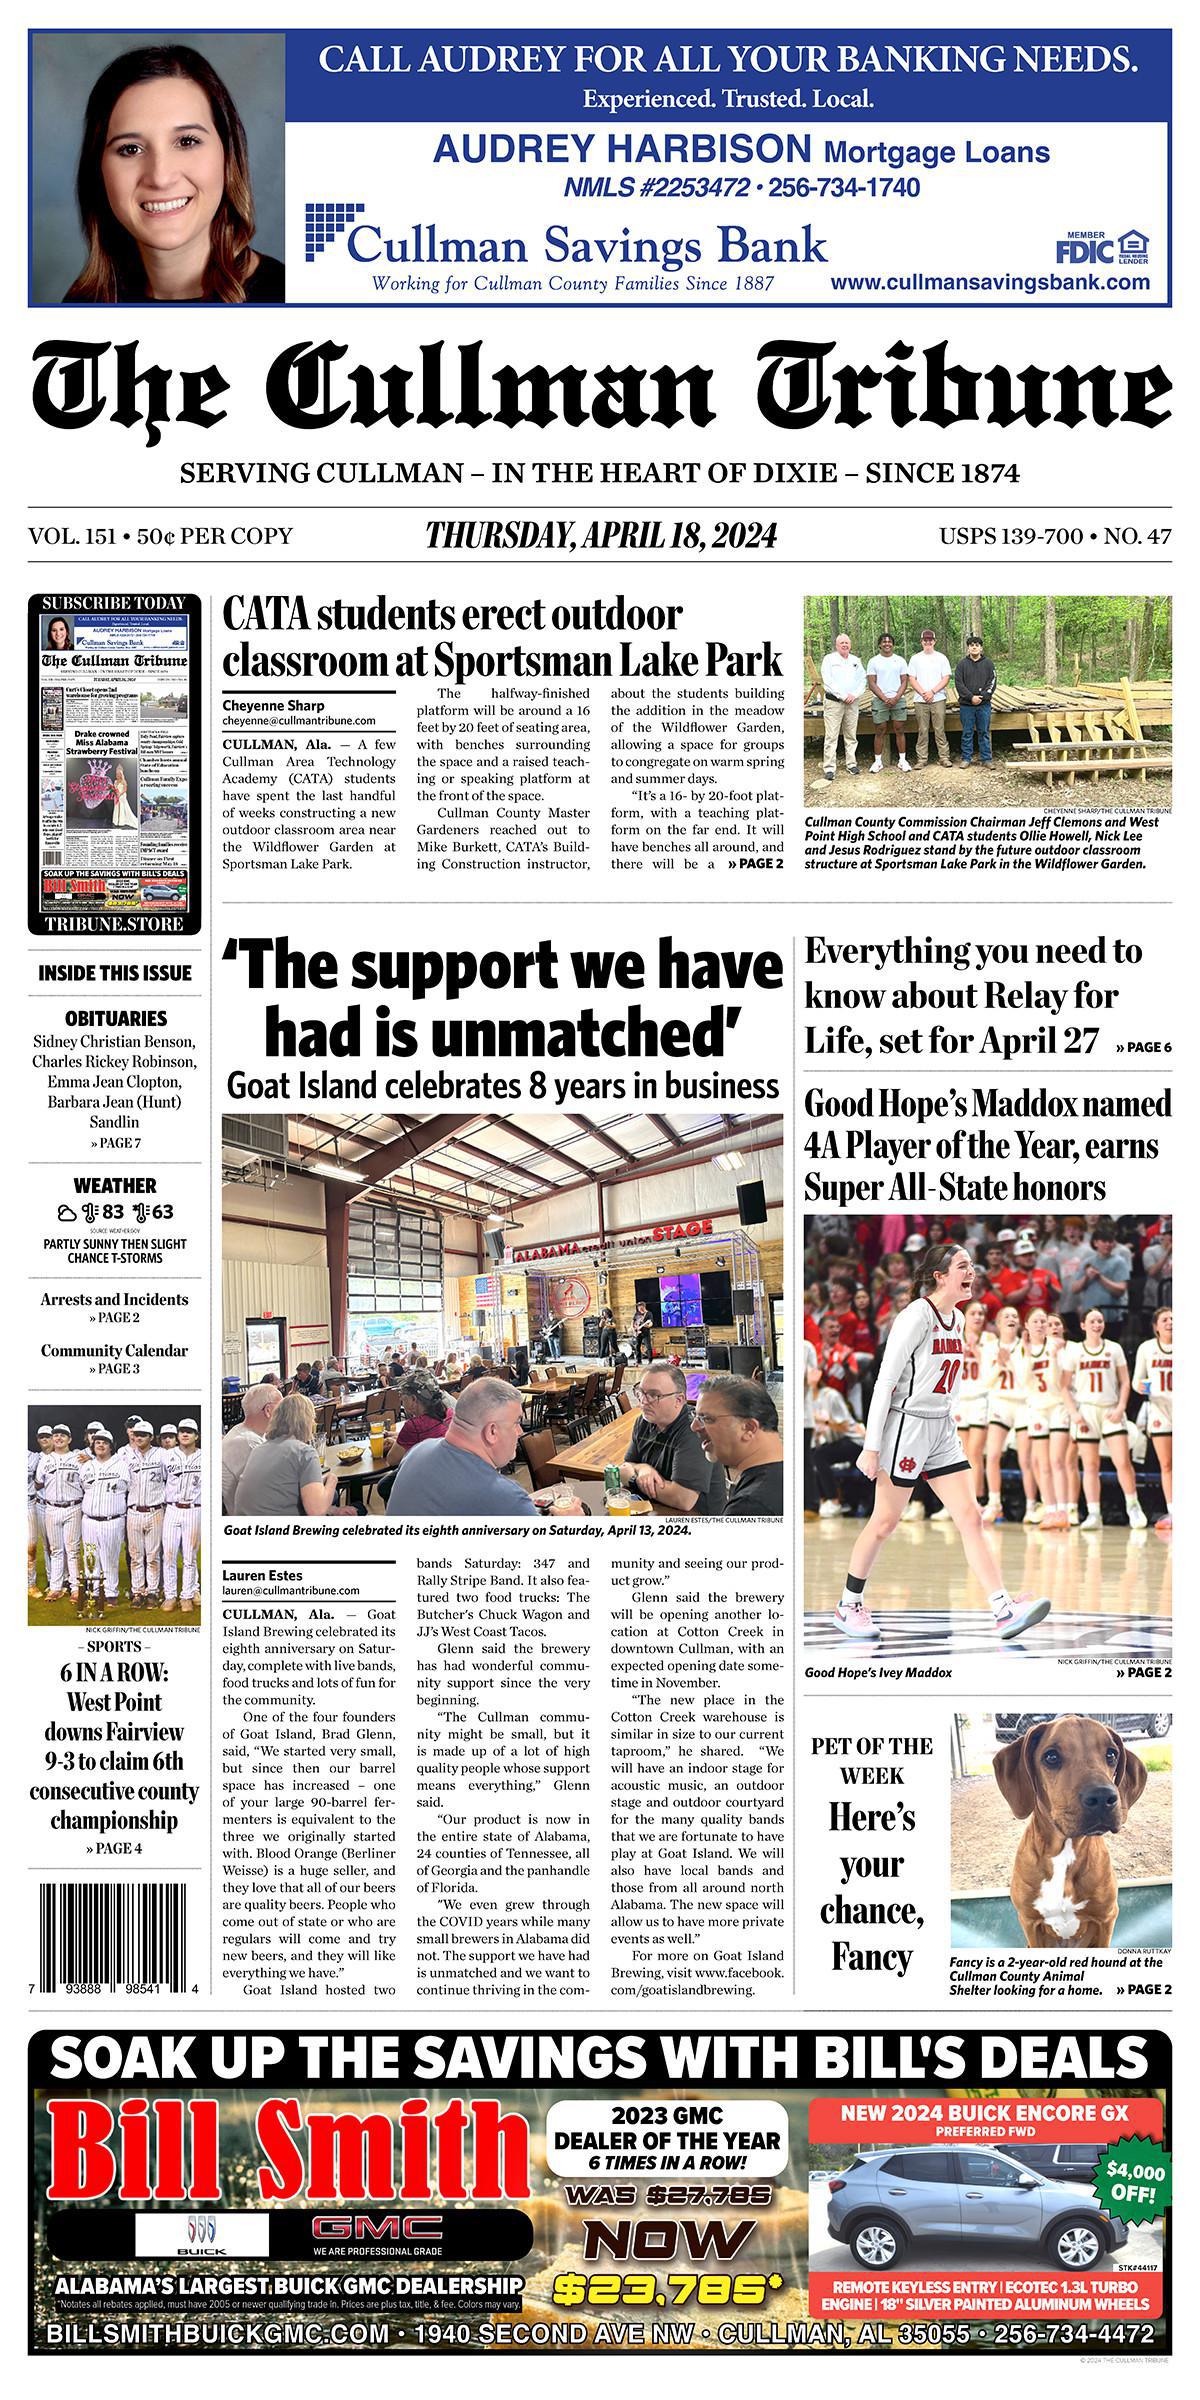 Good Morning Cullman! The 04-18-2024 edition of the Cullman Tribune is now ready to view.